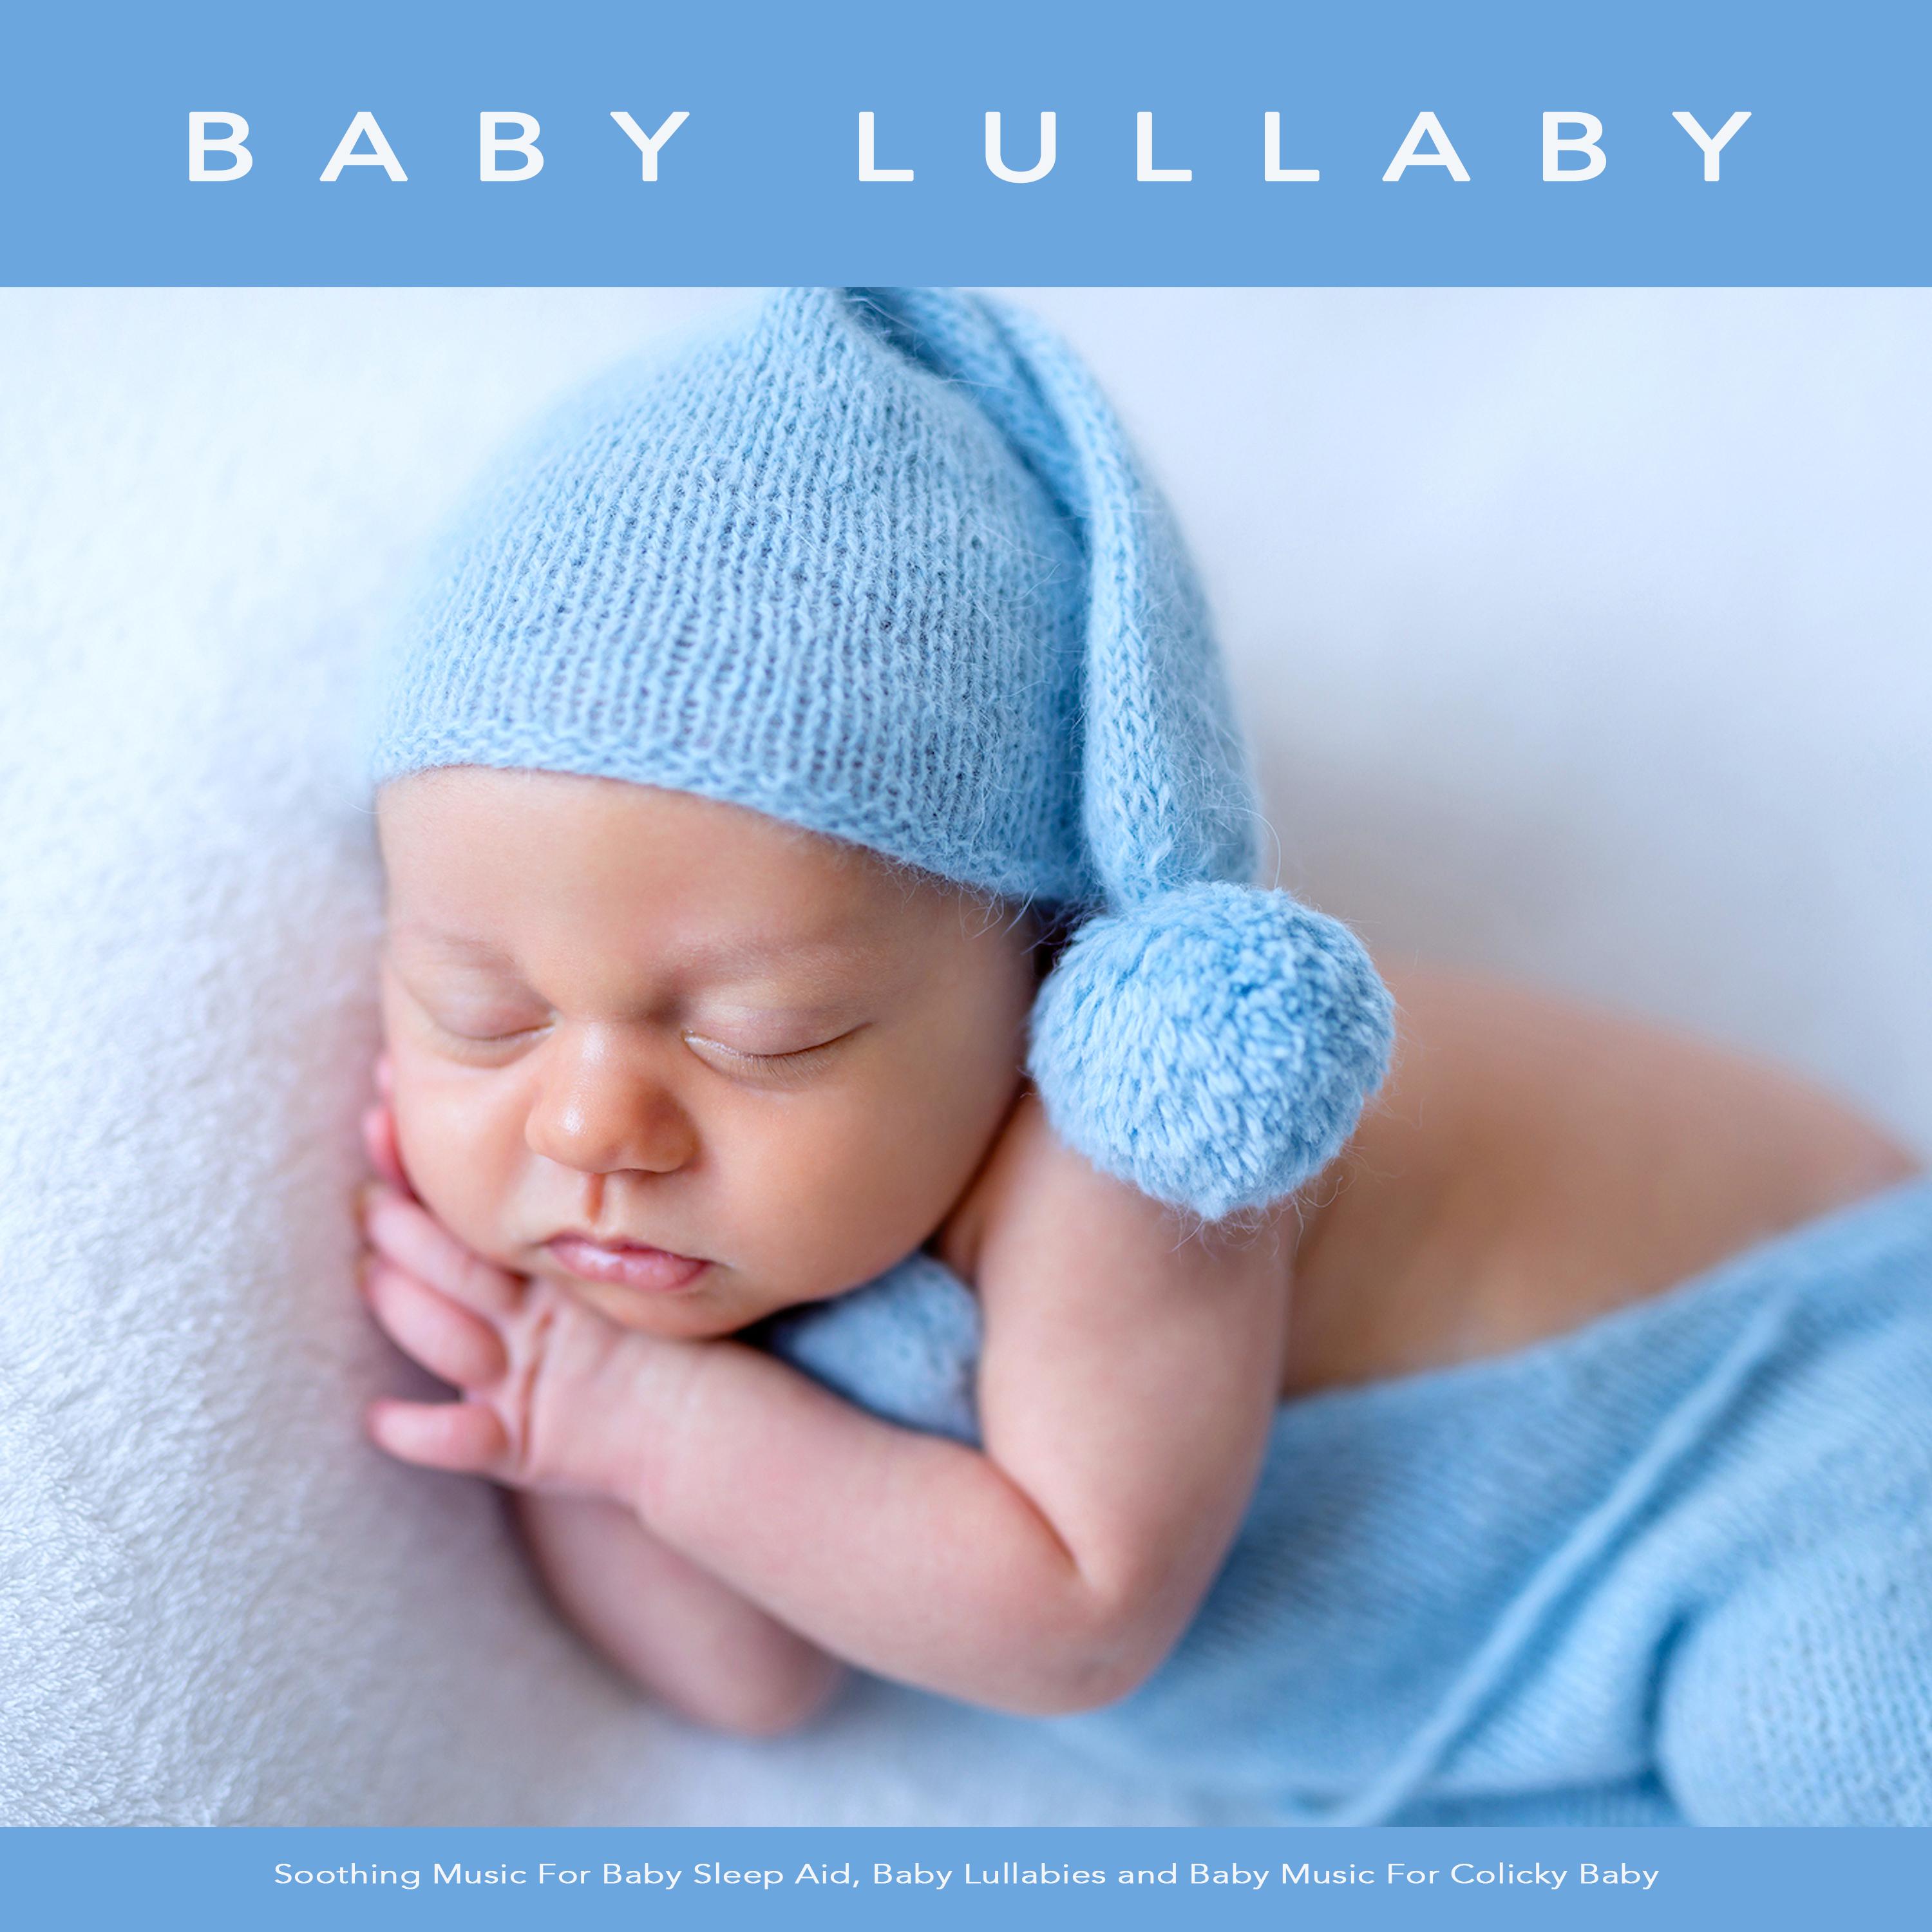 Baby Lullaby: Soothing Music For Baby Sleep Aid, Baby Lullabies and Baby Music For Colicky Baby